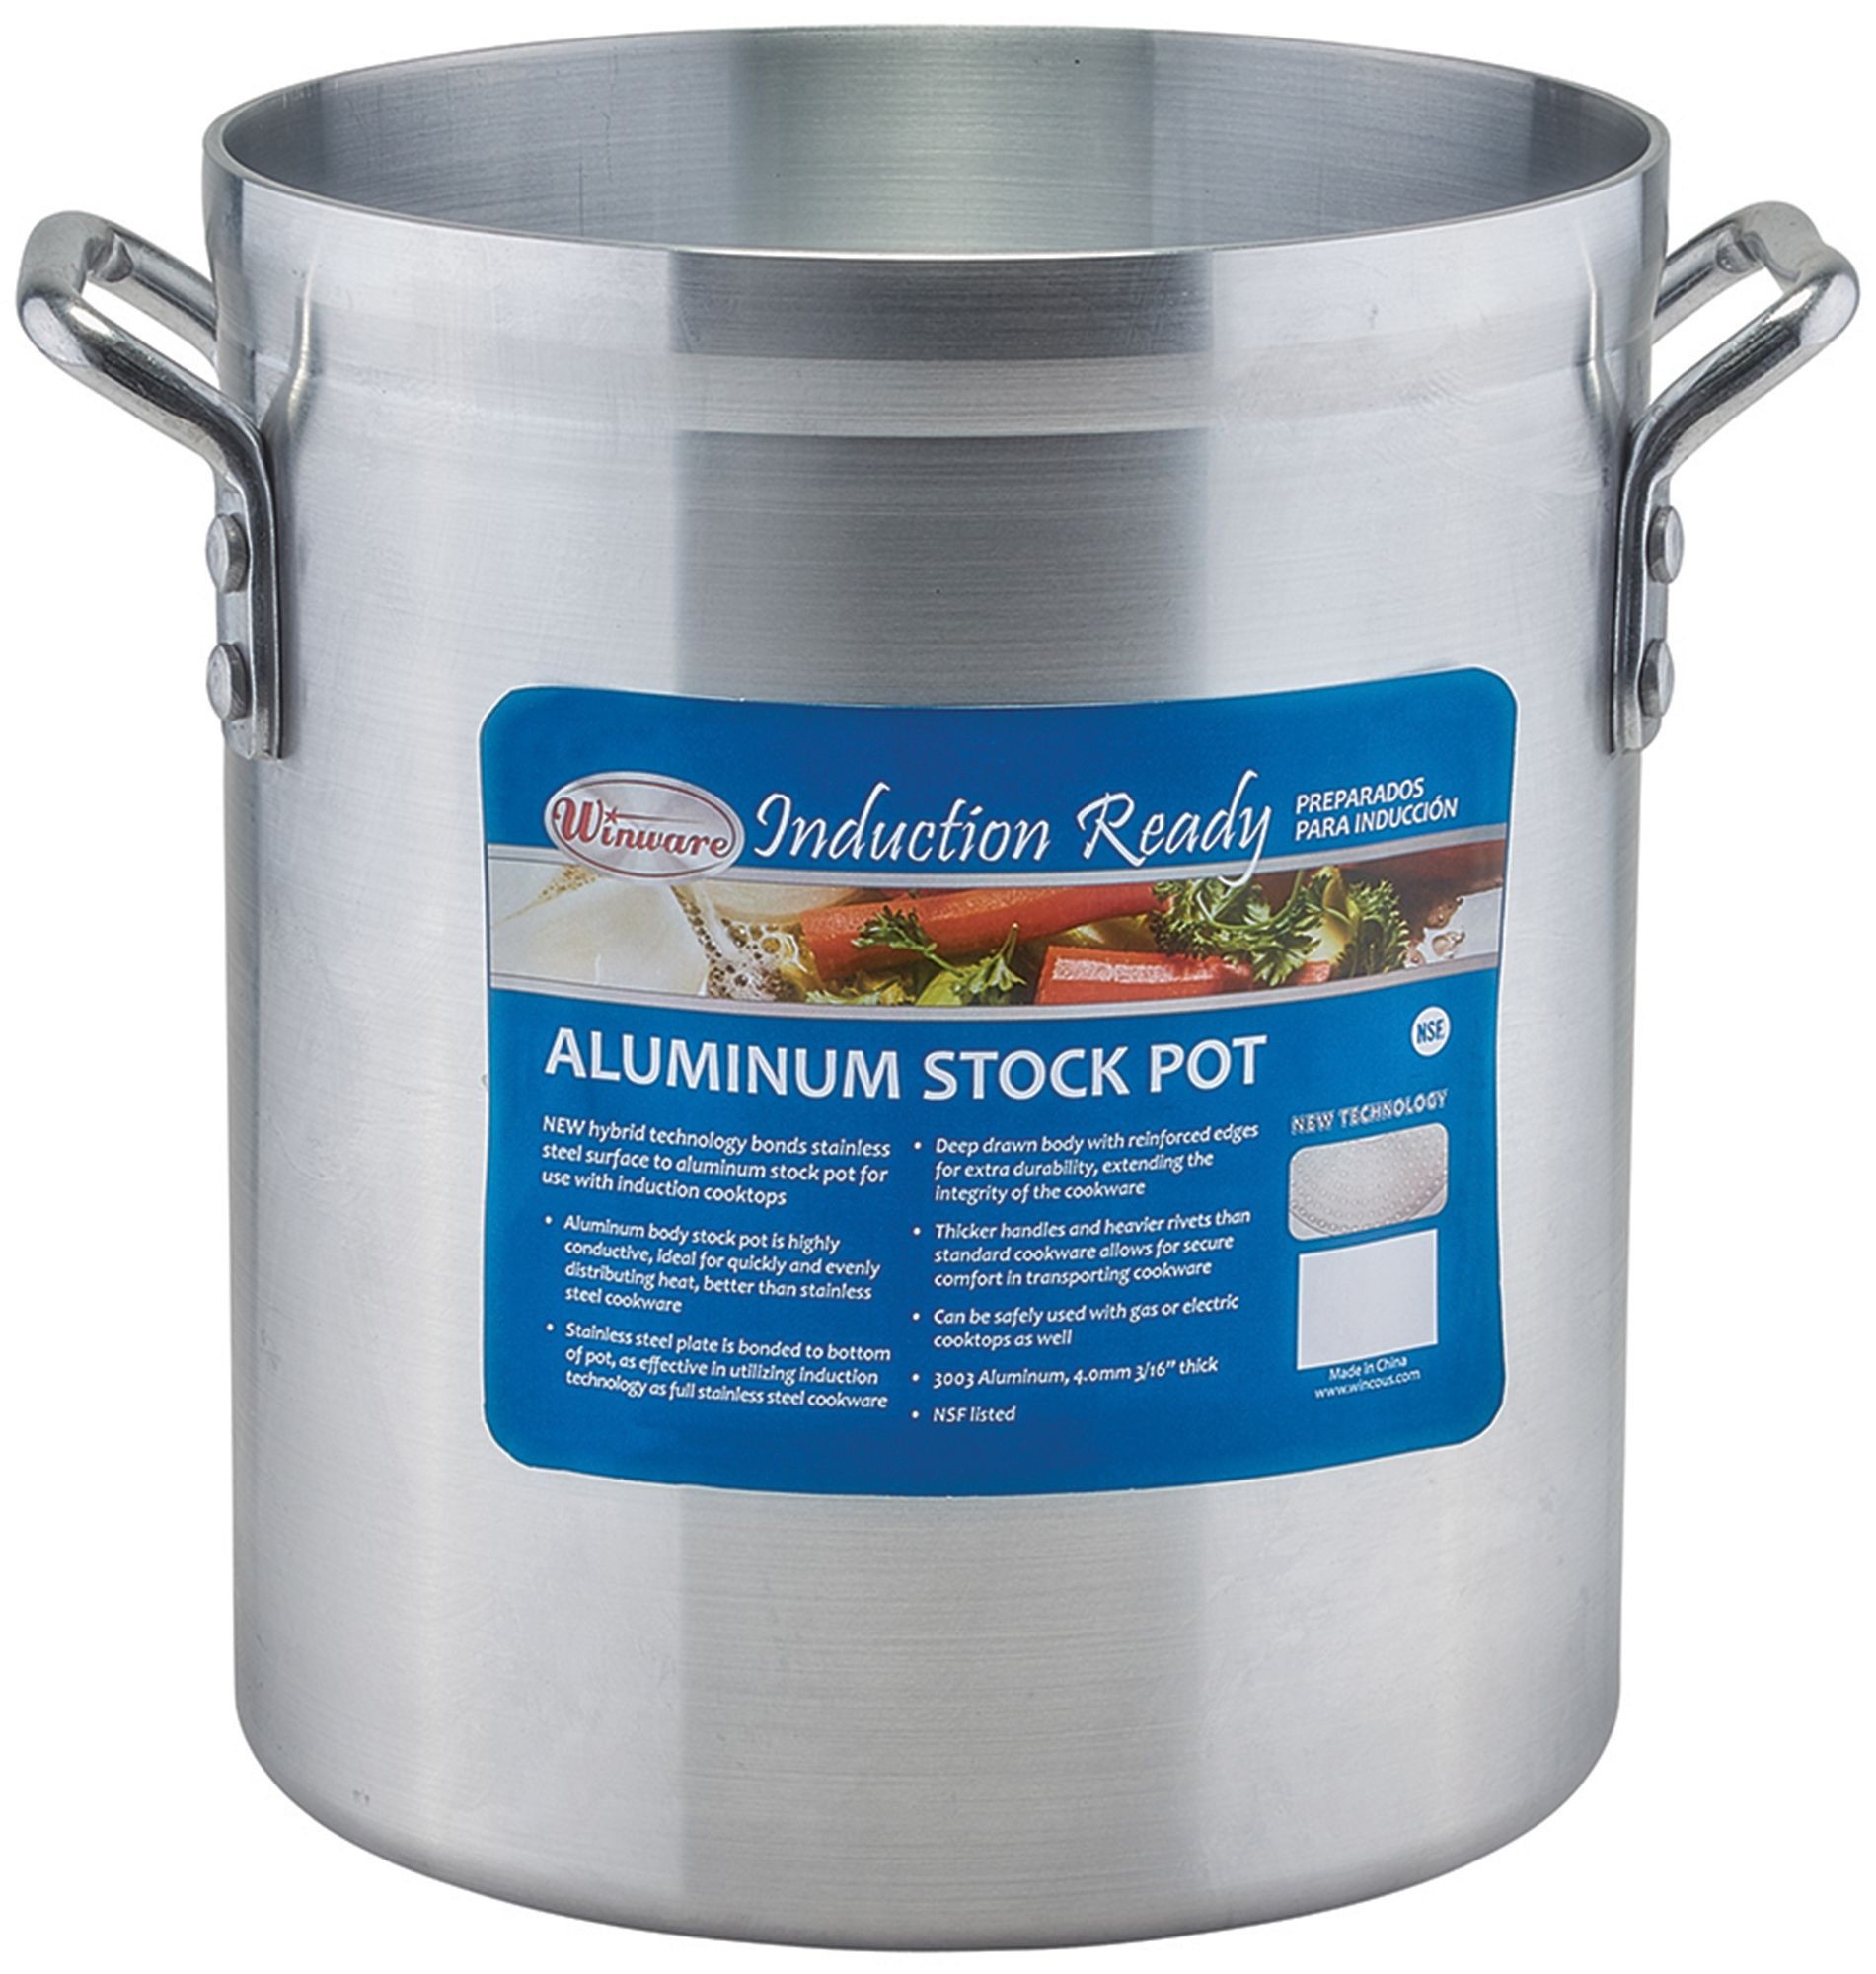 Winco AXSI-10 10 Qt. Induction Ready Aluminum Stock Pot with Stainless Steel Bottom